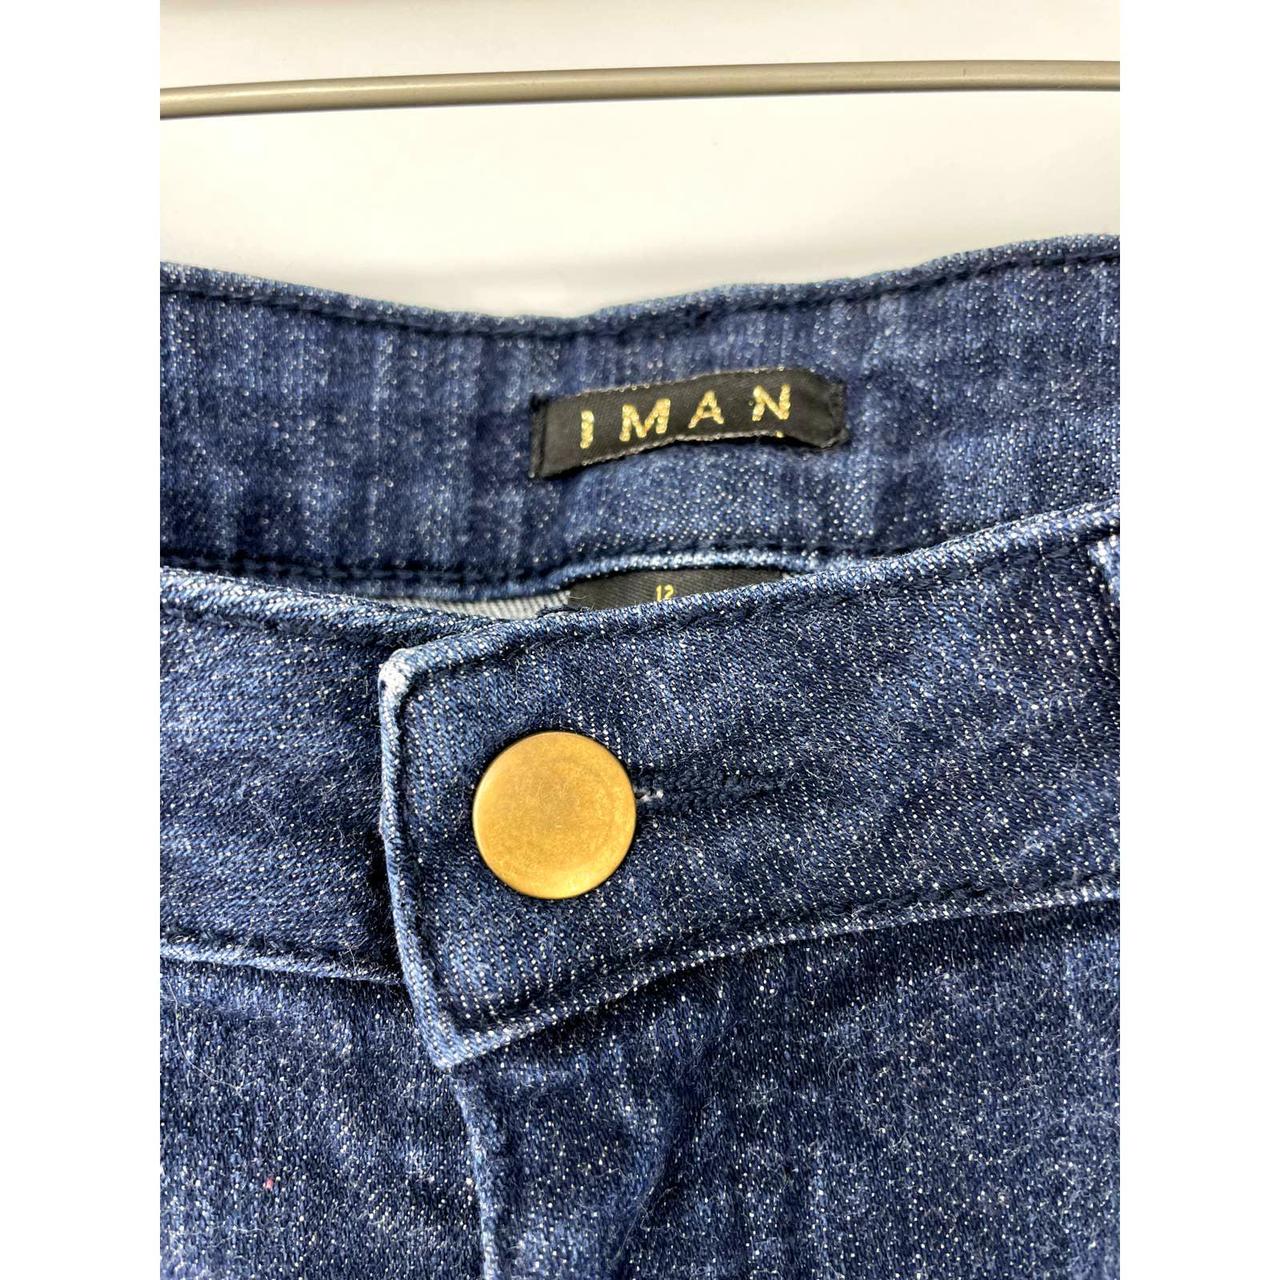 IMAN Global Chic Curve Defining Stretch Knit Jean 